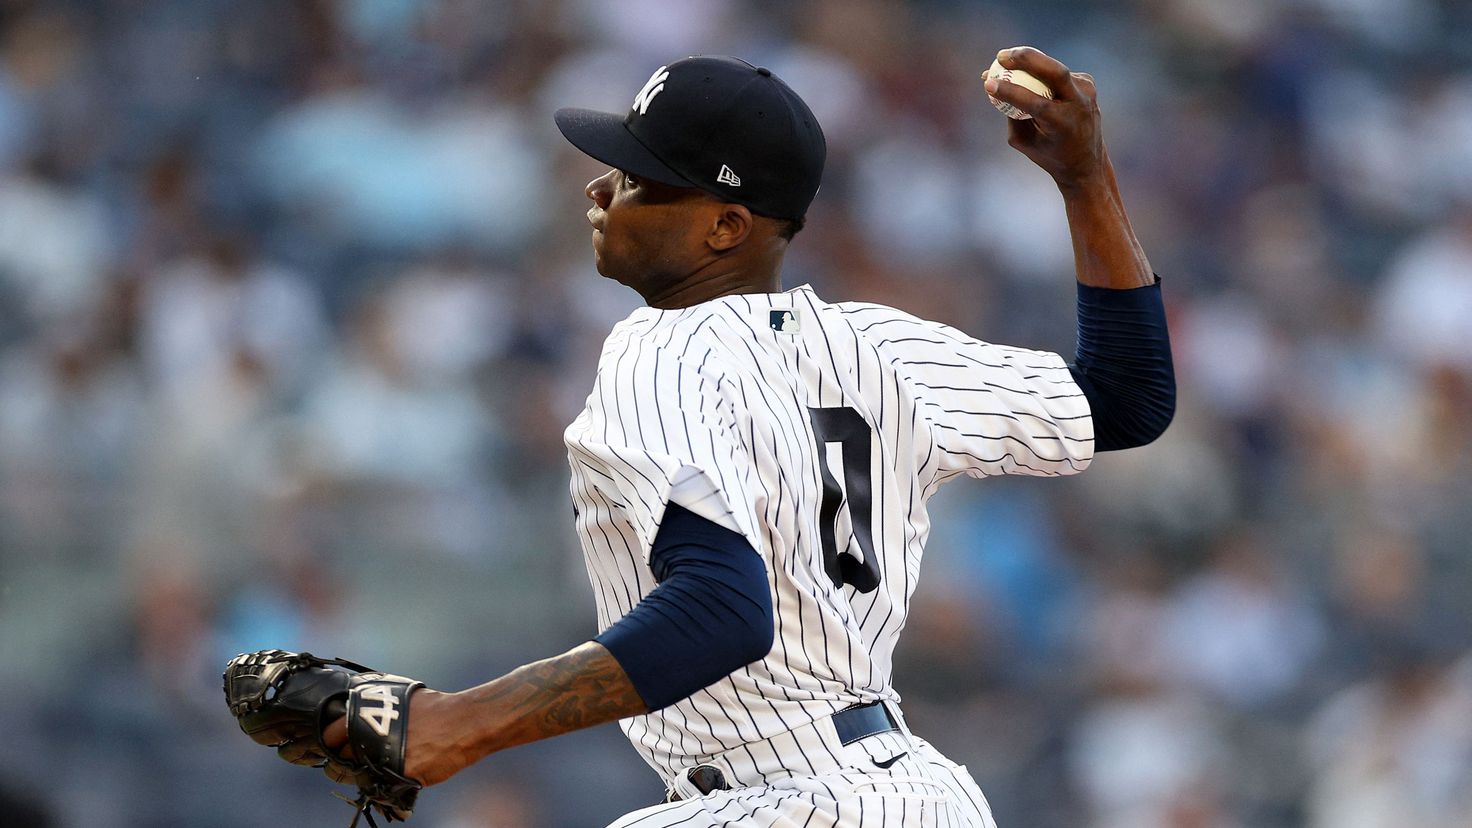 Domingo Germán of the Yankees was suspended 10 games for sticky substance on his hands
